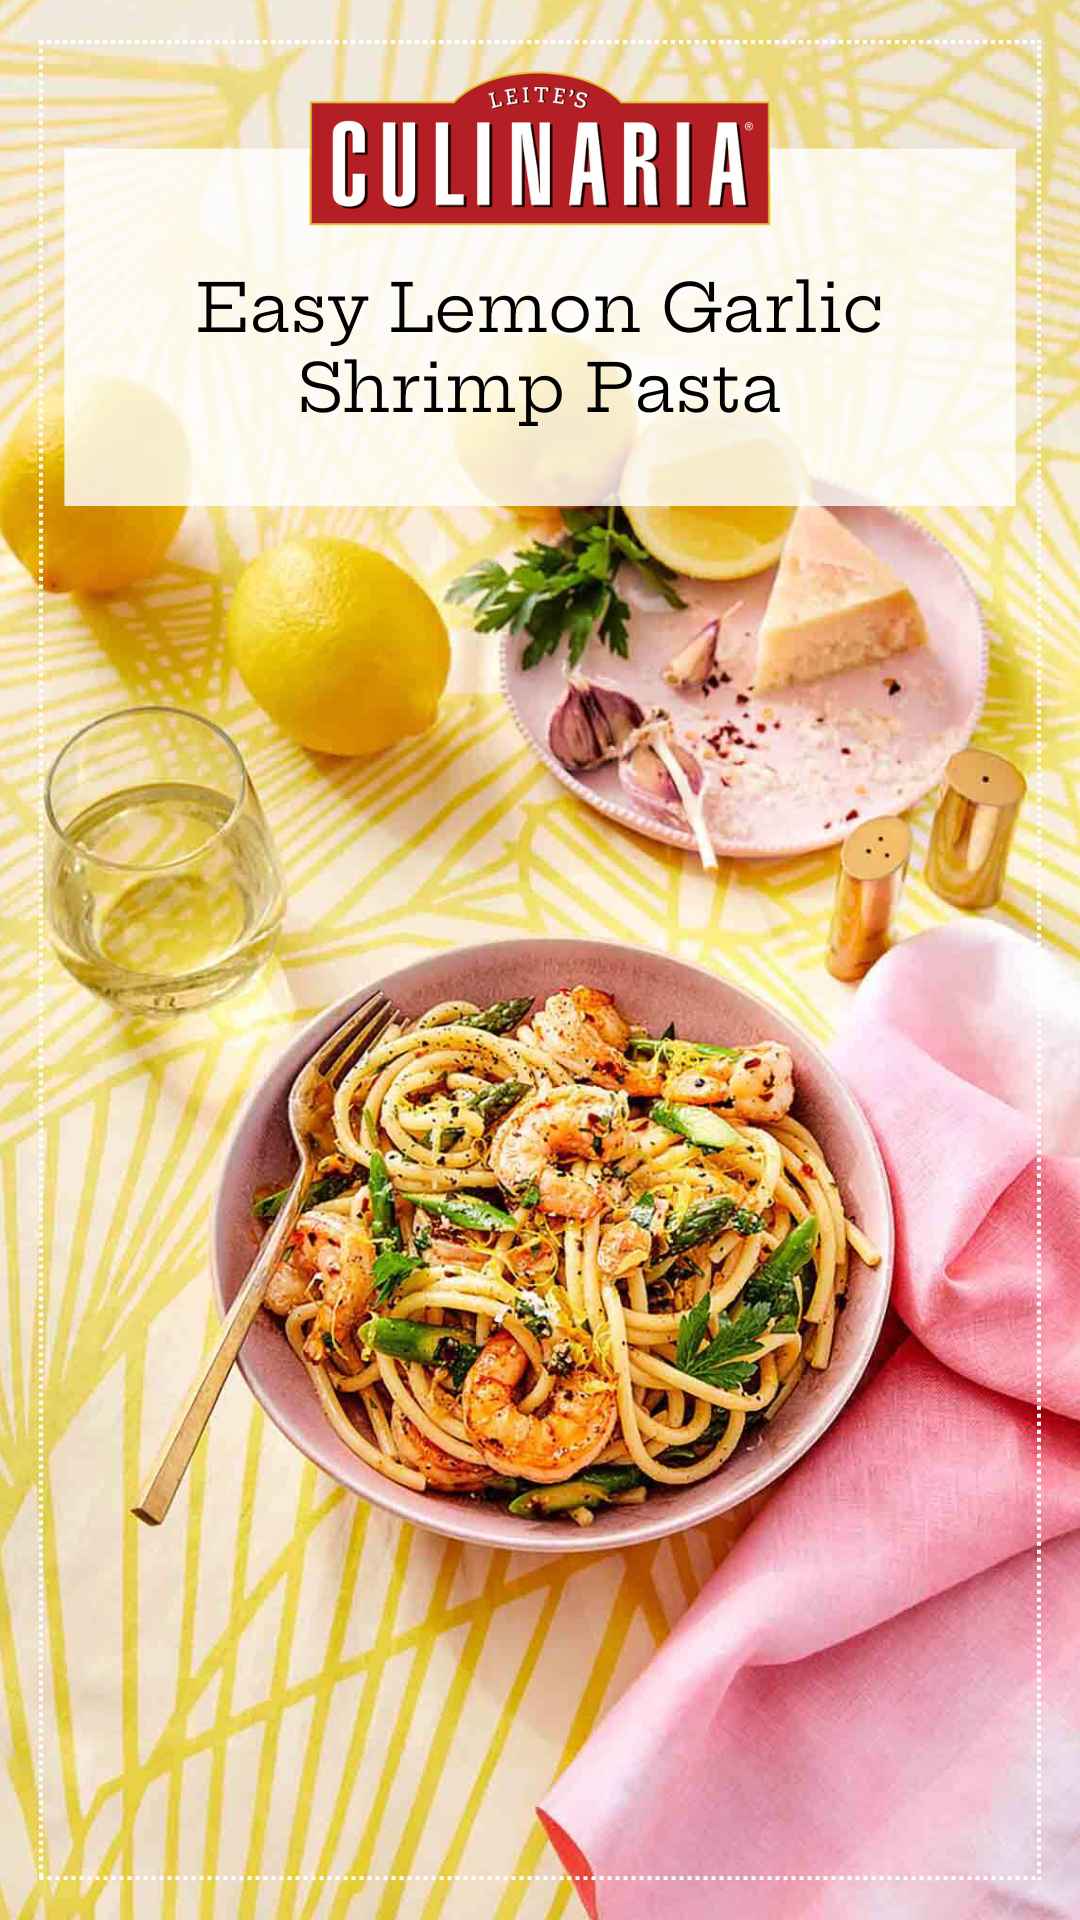 A bowl filled with lemon garlic shrimp pasta with a glass of white wine, a pink napkin, and lemons nearby.